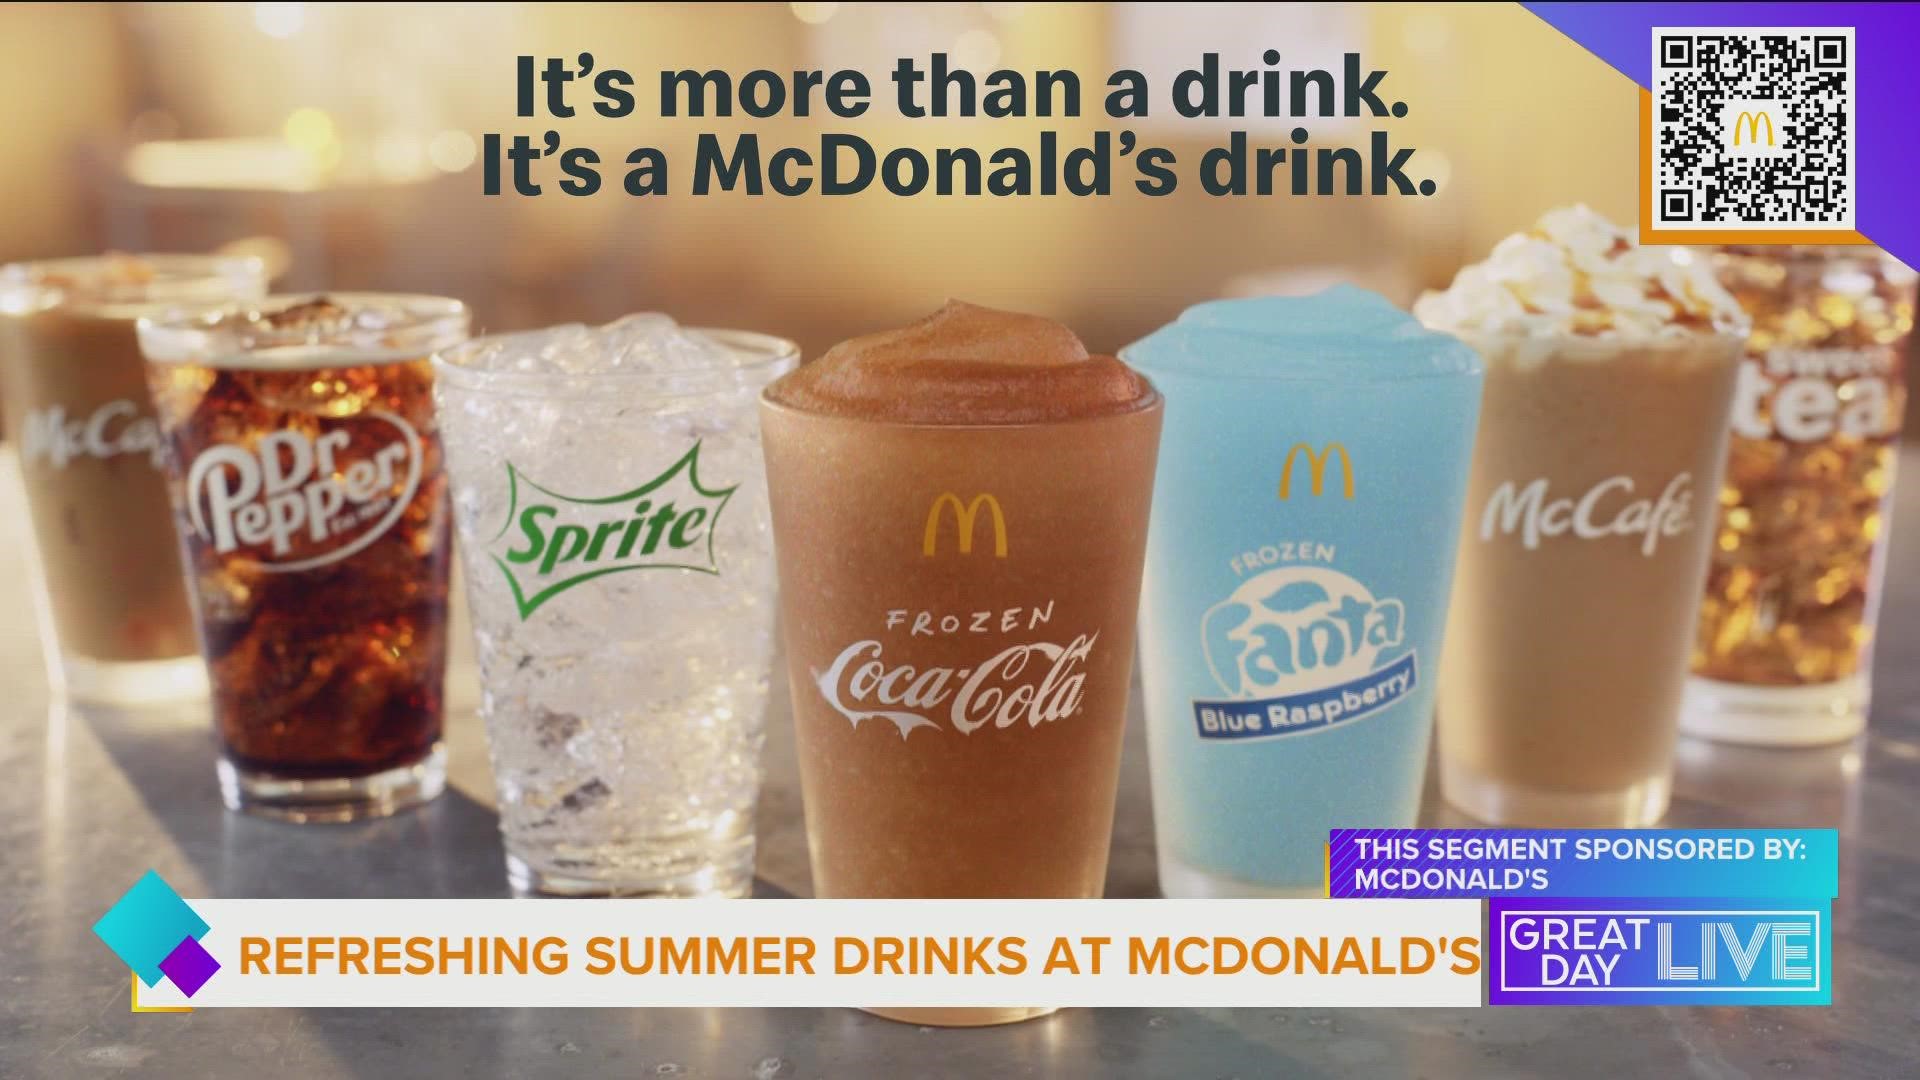 McDonald’s Summer Drinks will help cool you down